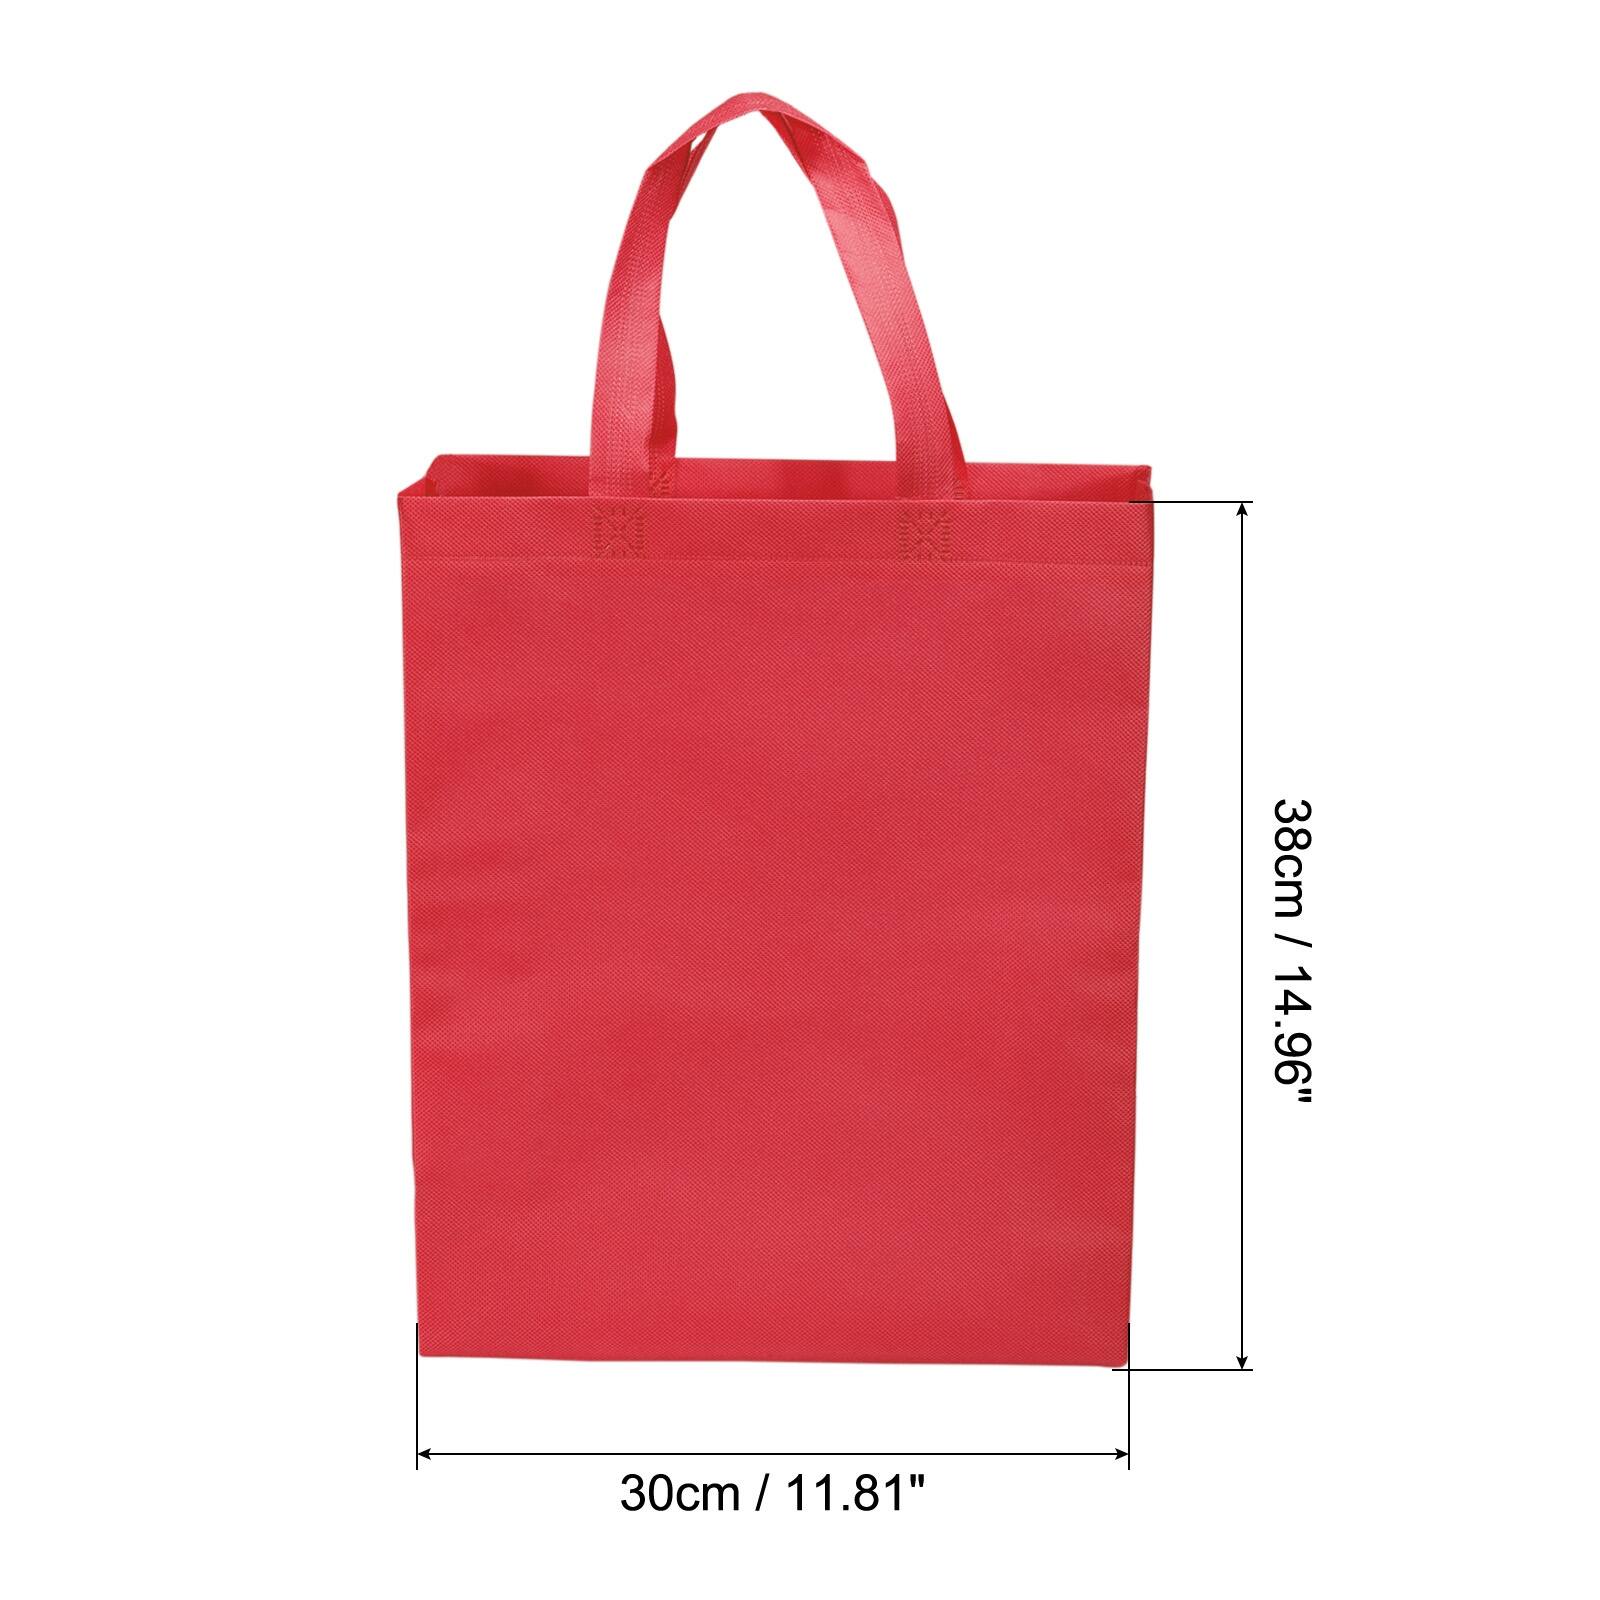 38x30cm Reusable Gift Bags 10Pcs Non-Woven Grocery Tote Bag for Travel